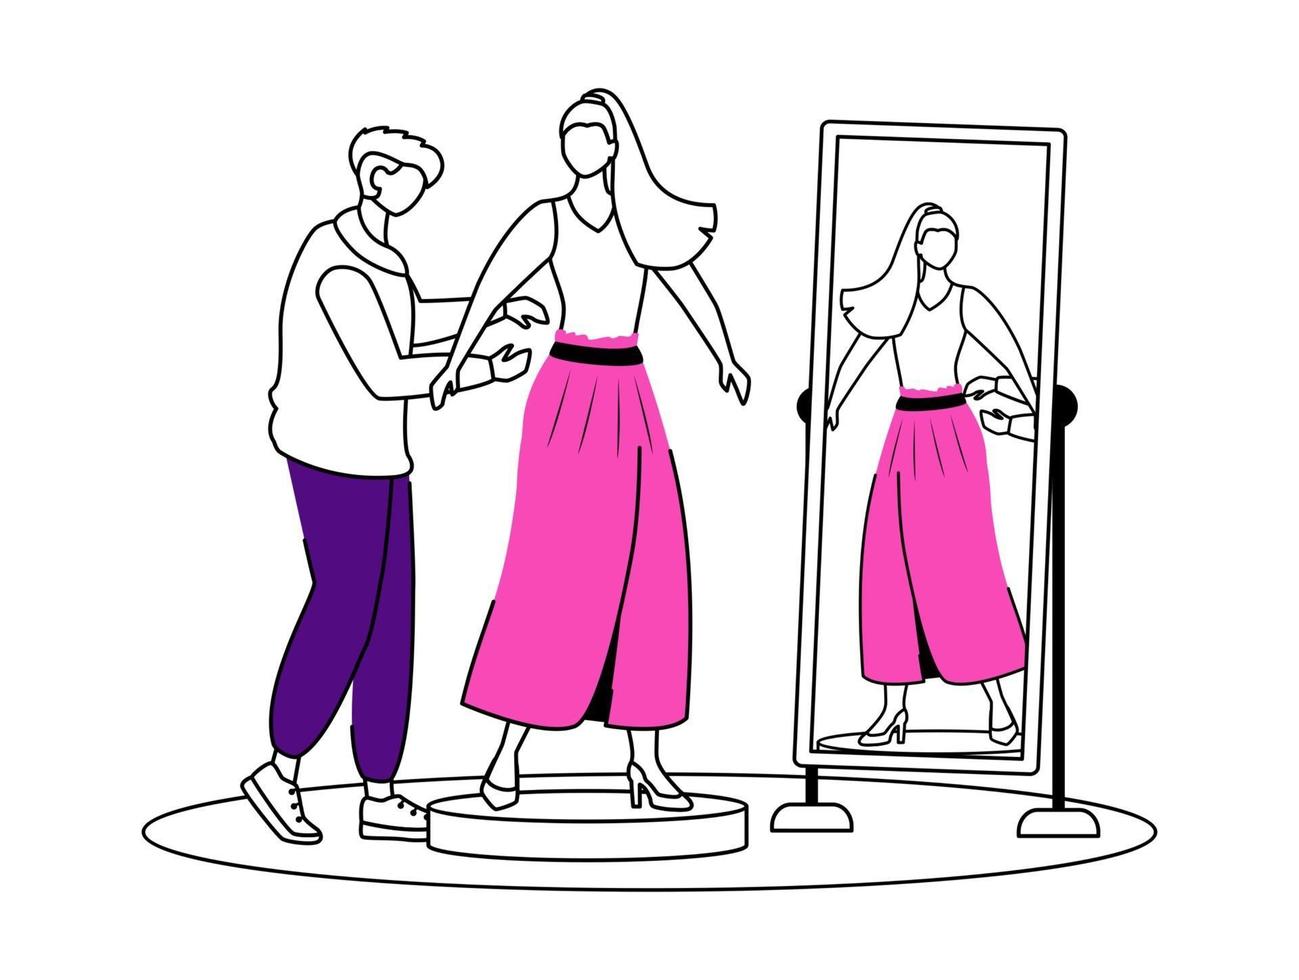 Fashion designer flat contour vector illustration. Dressing up famous people. Trying on new outfit. Preparing model for runway isolated cartoon outline character on white background. Simple drawing